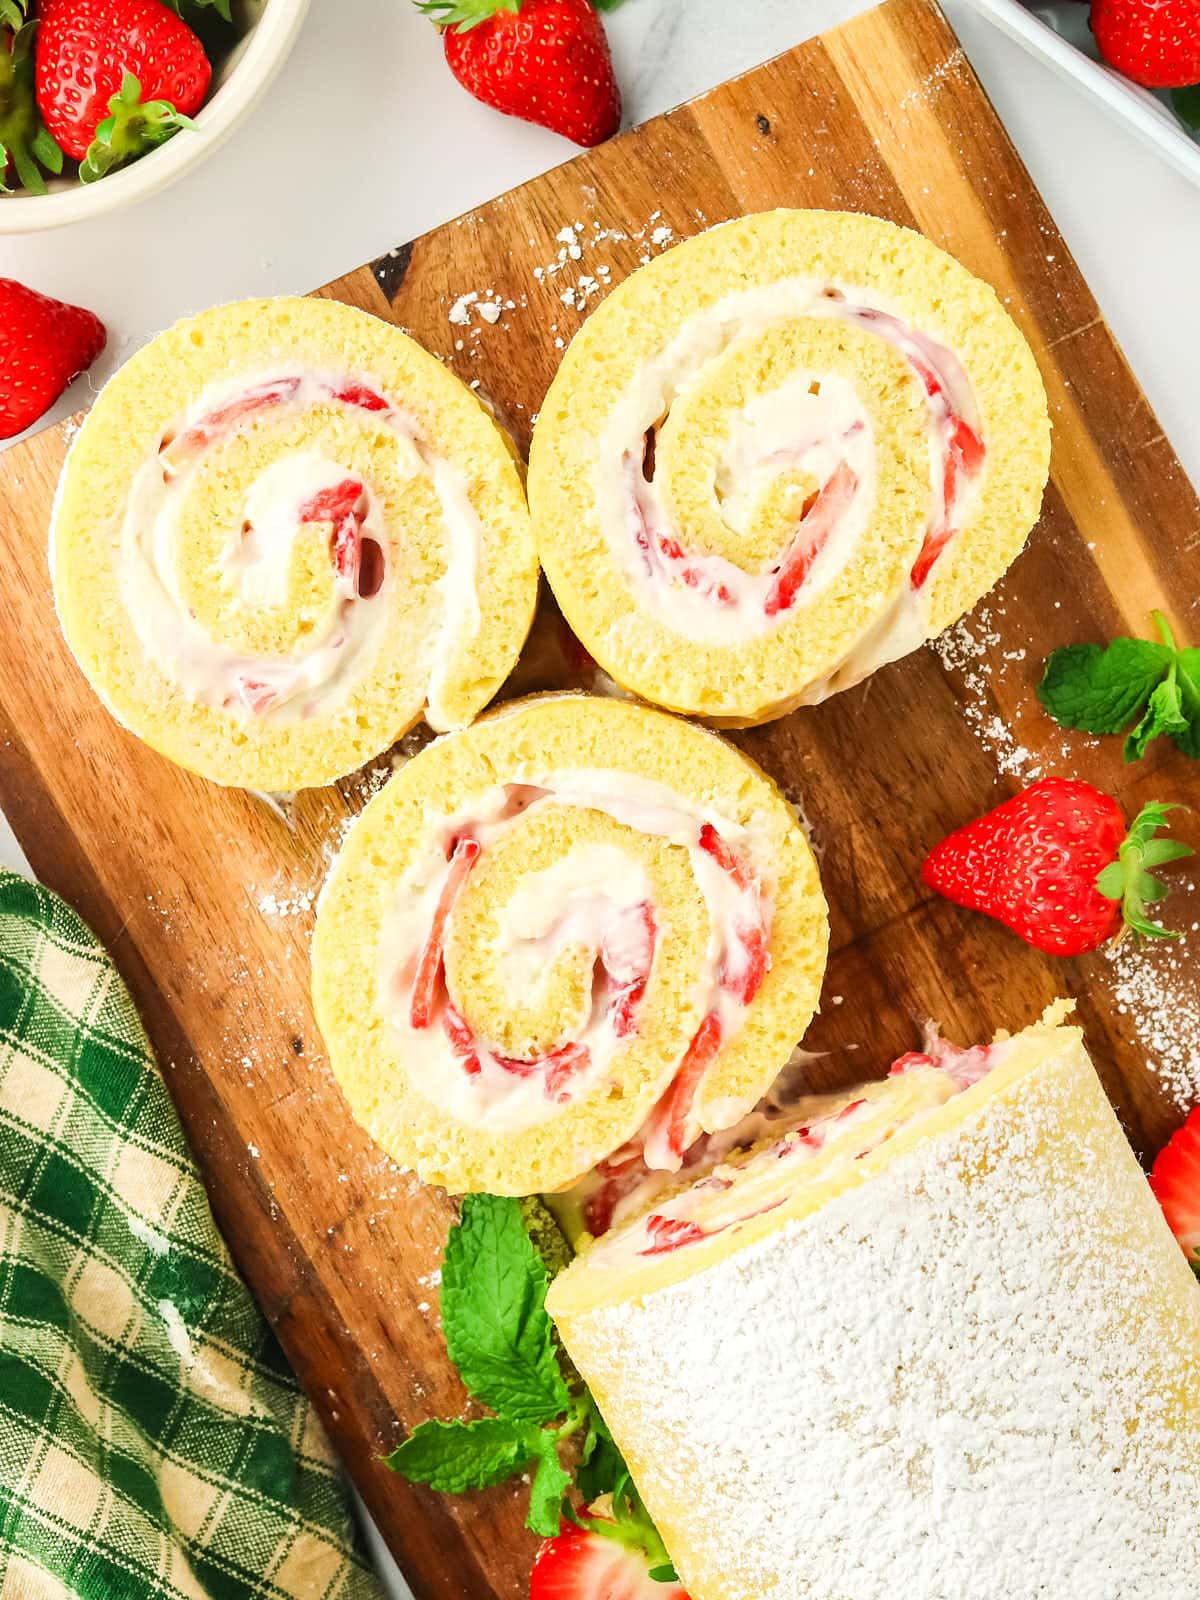 A strawberry roll with cream and strawberries on a cutting board.